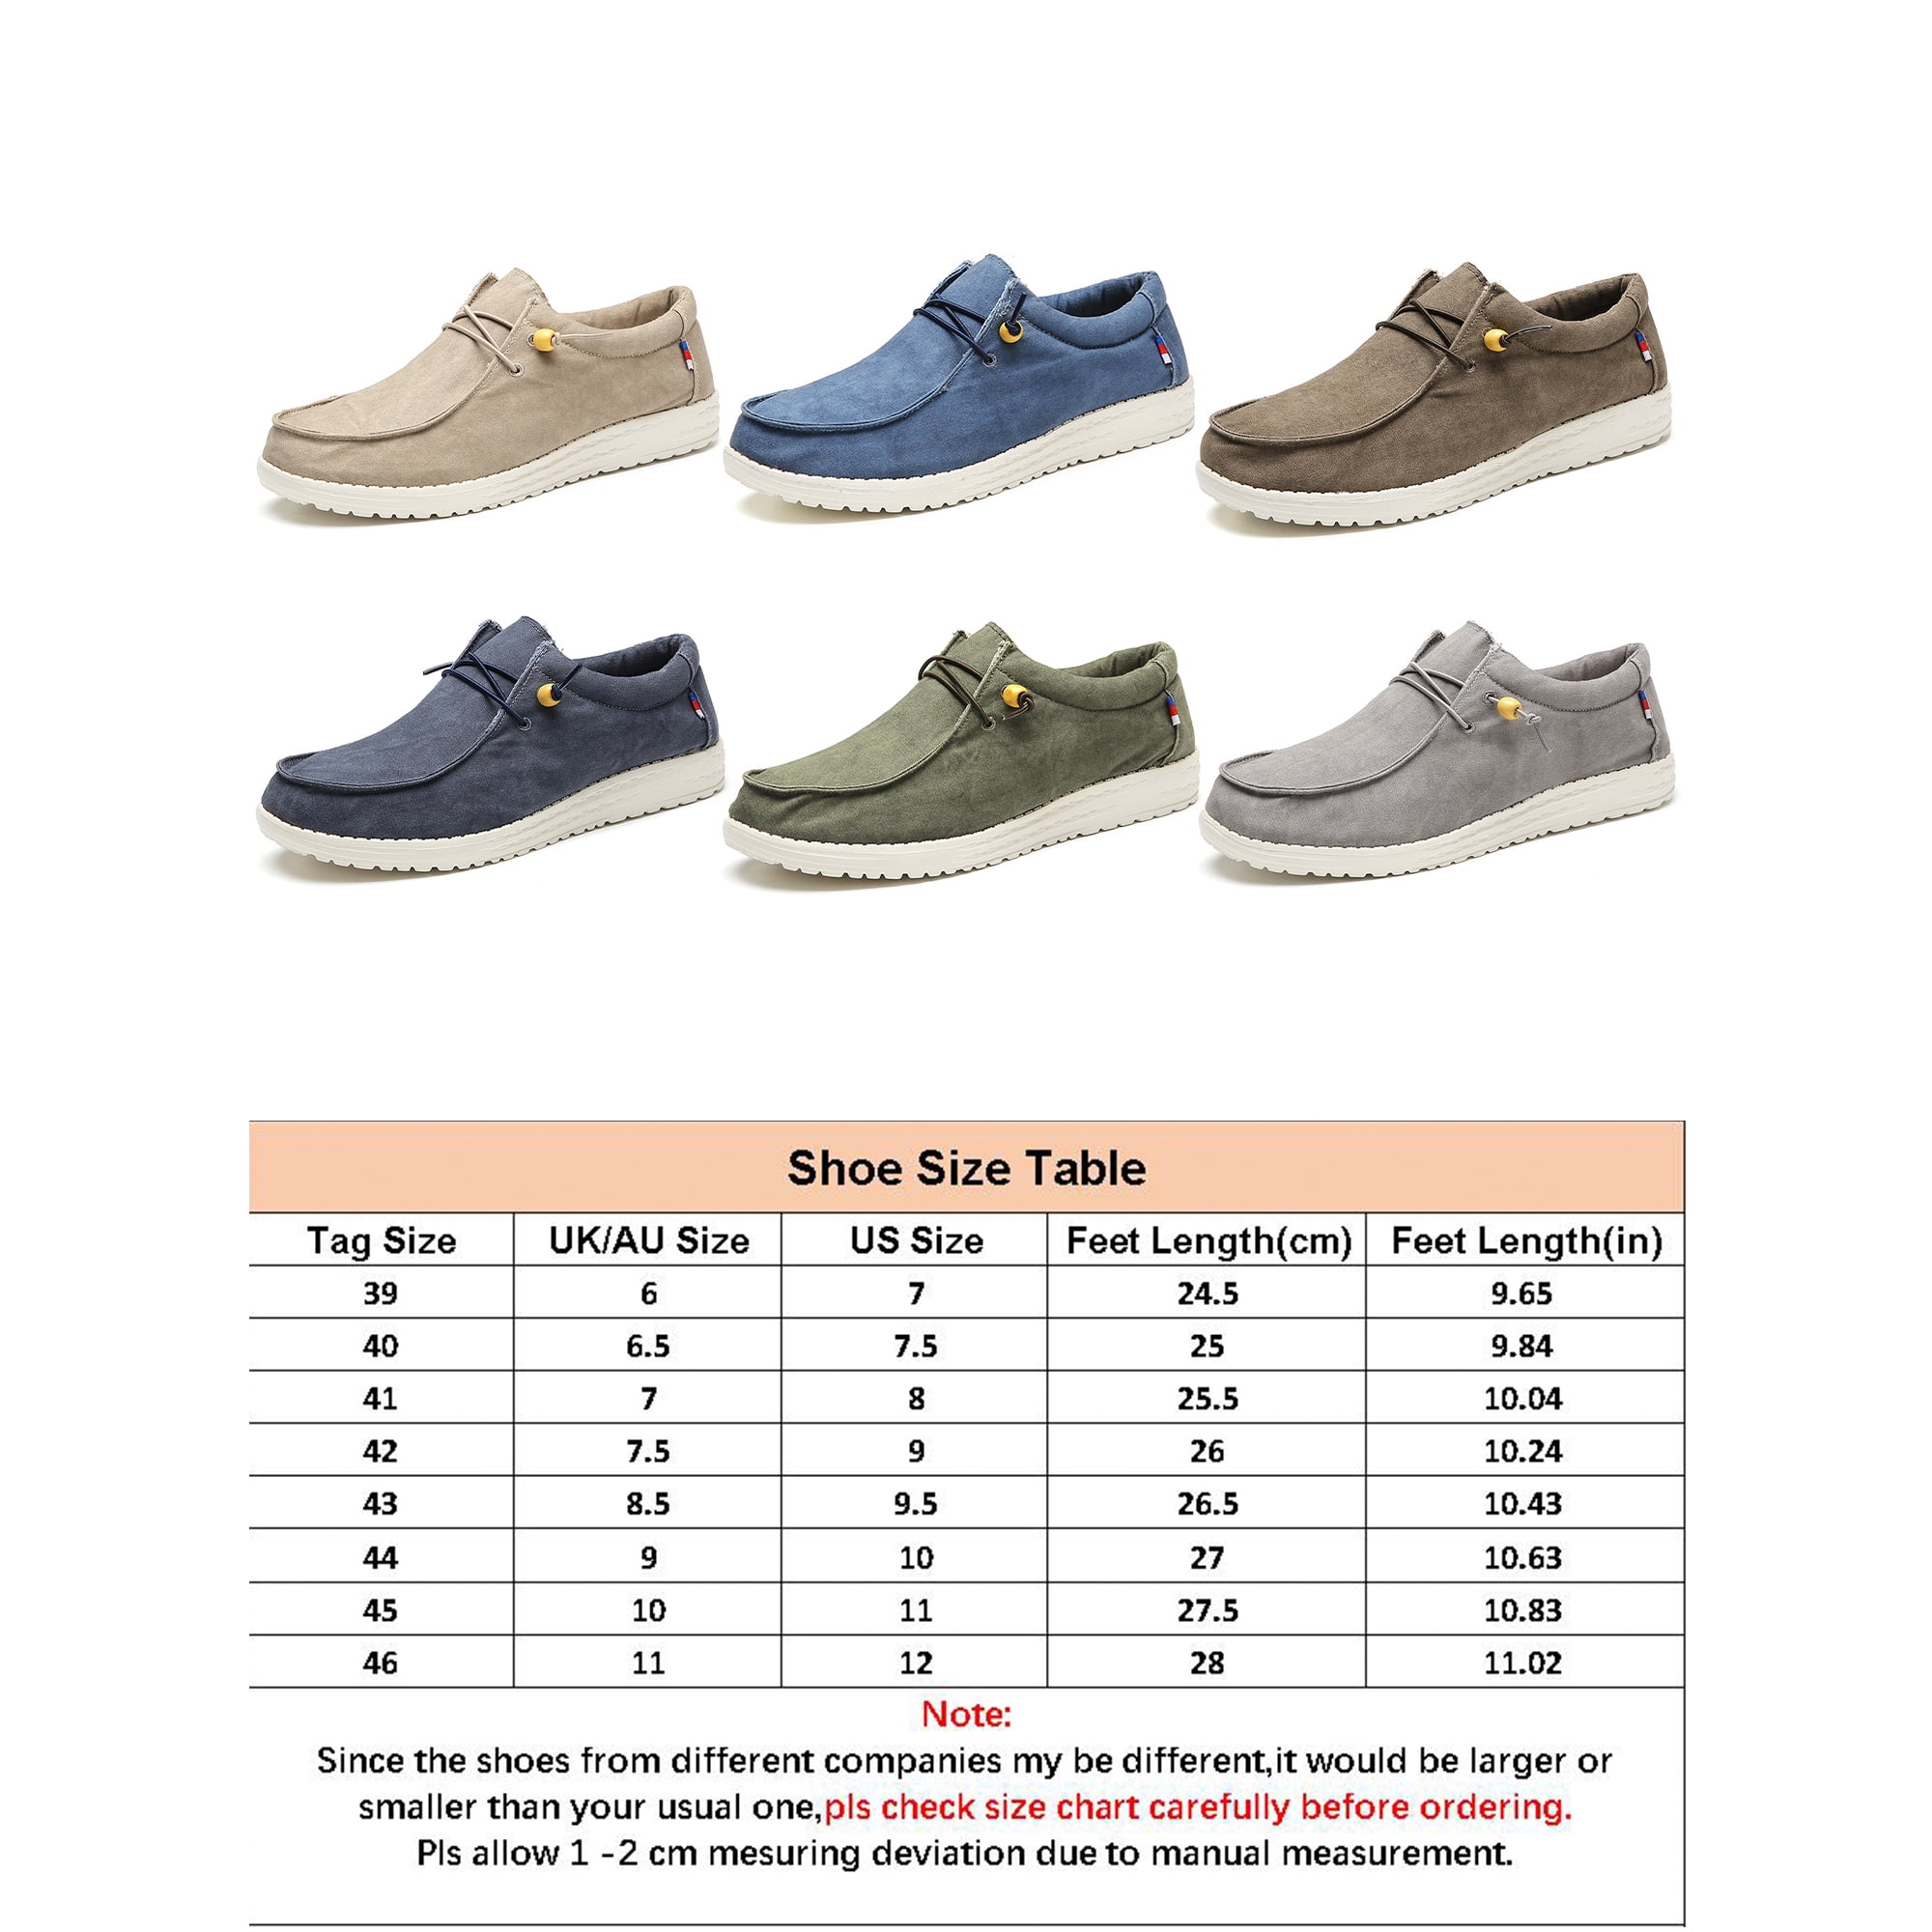  TDA Men's New Knot Suede Driving Loafers Penny Boat Shoes |  Loafers & Slip-Ons